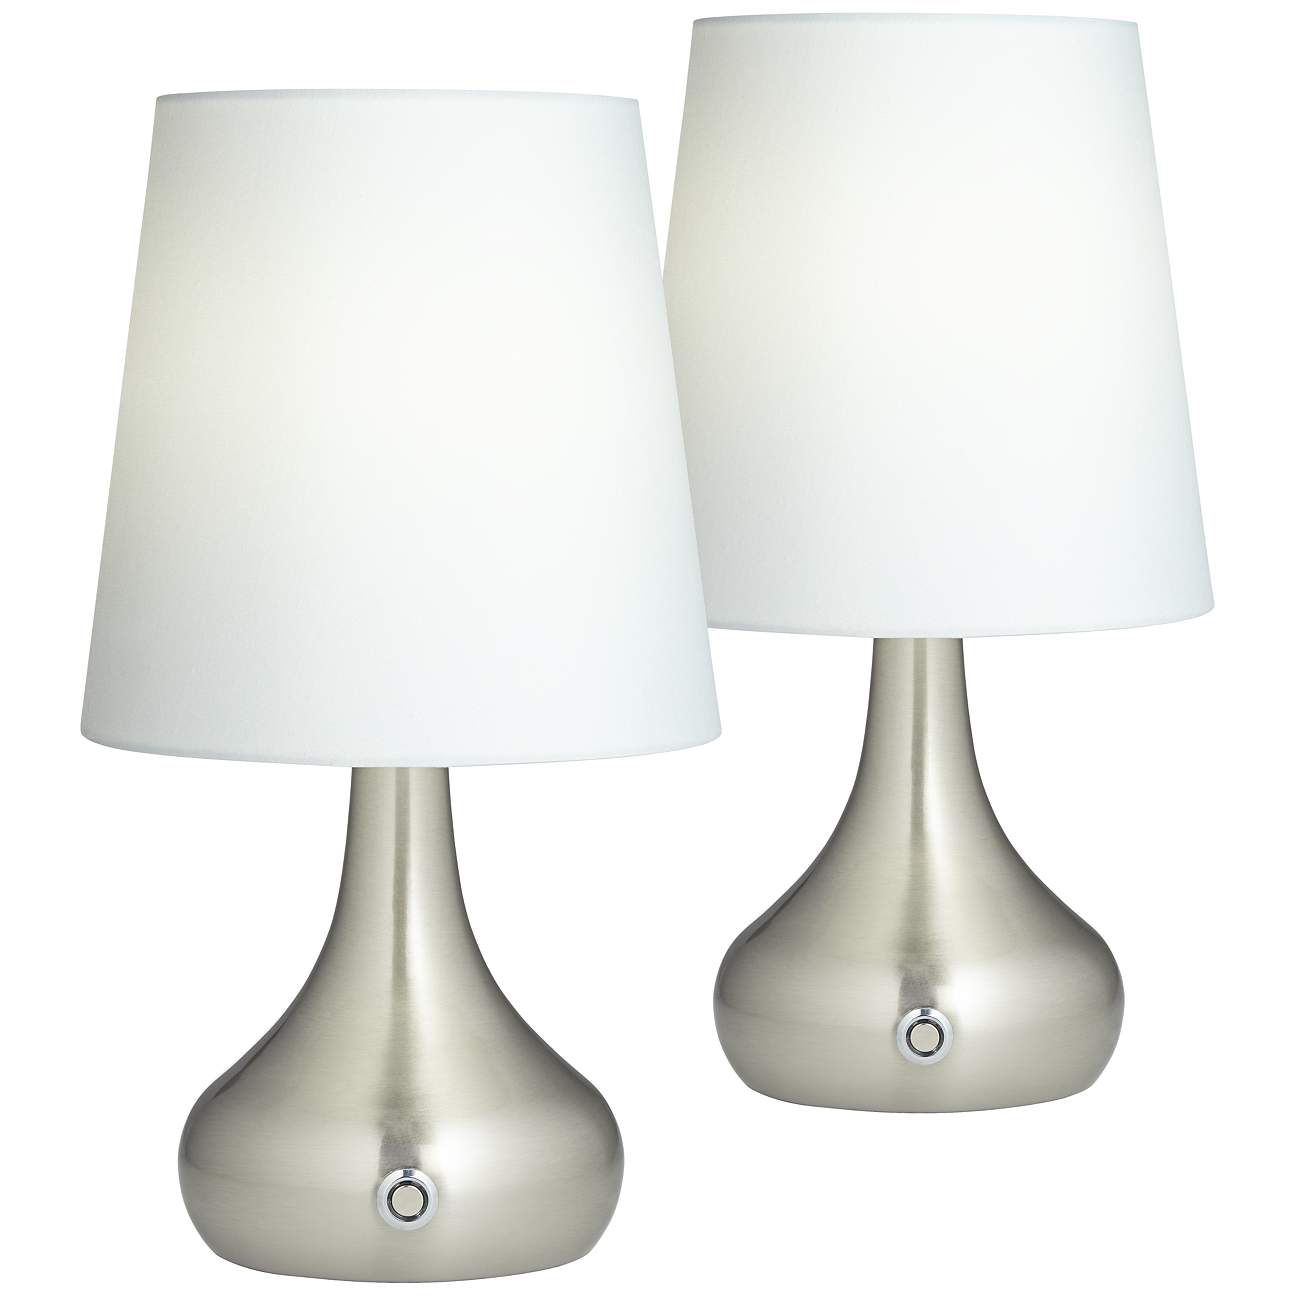 Firefly Nickel Battery Powered LED Table Lamps Set of 2 - #80M19